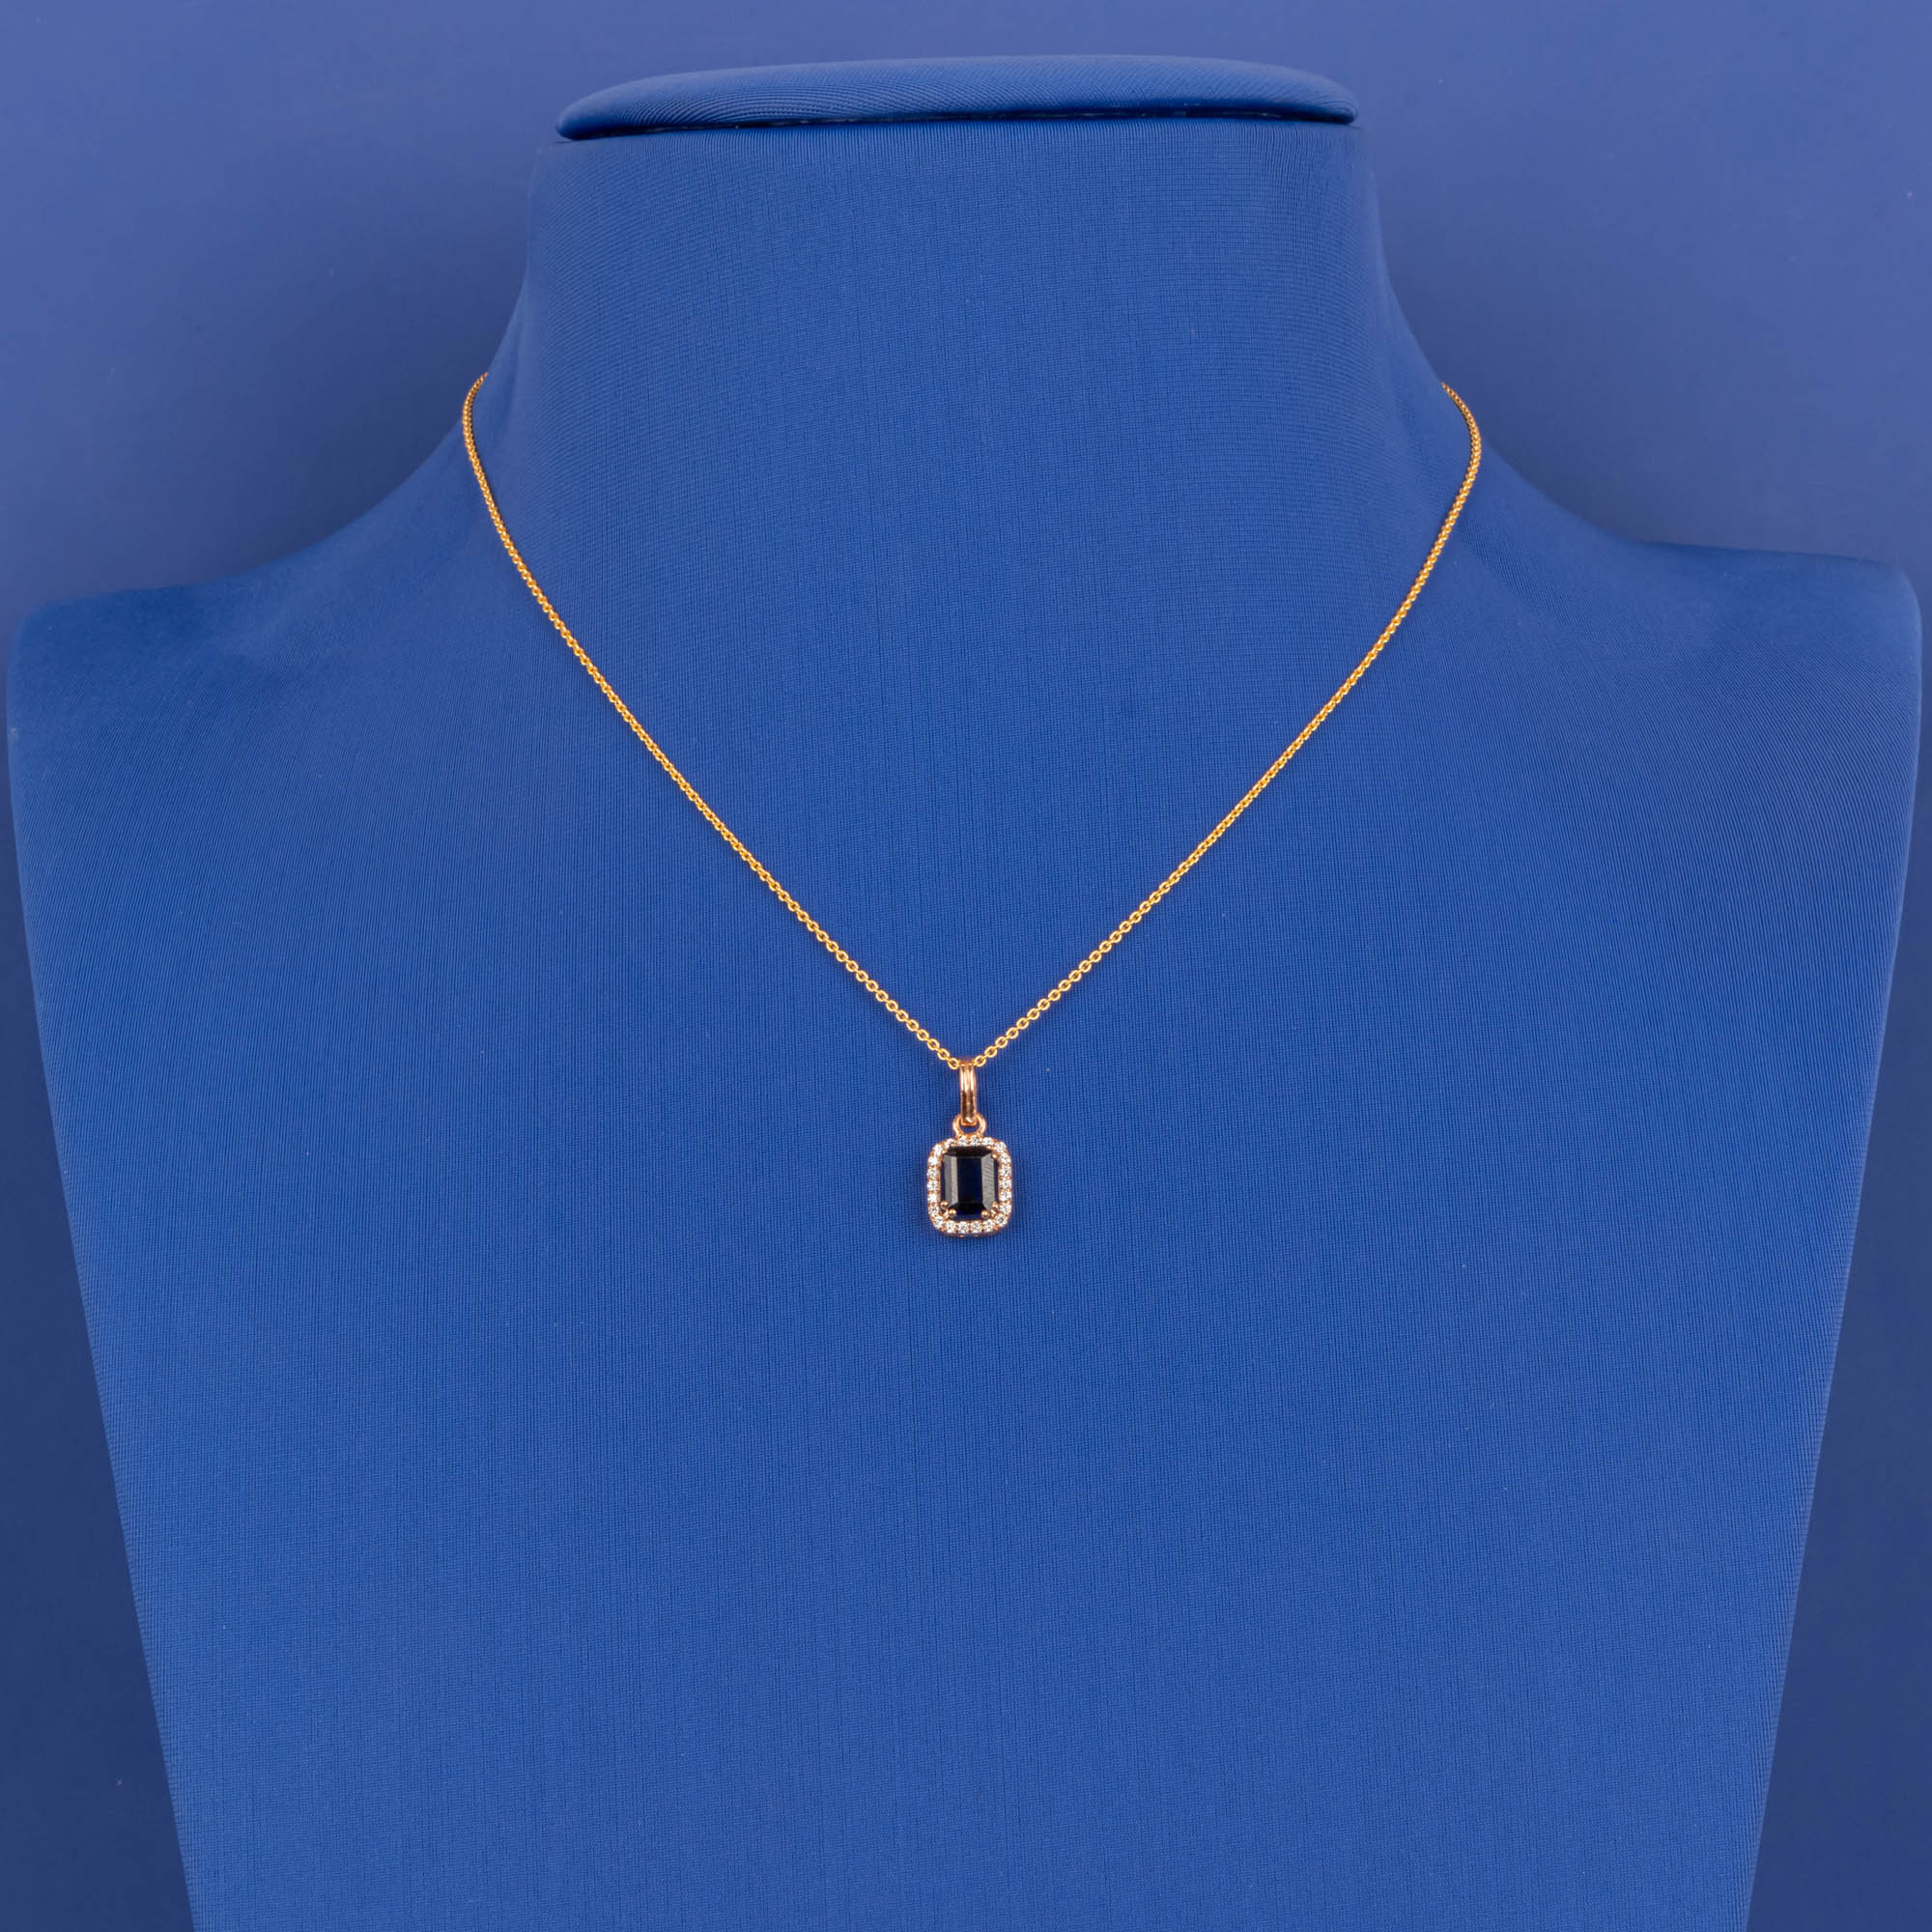 Sapphire Enchantment: Stunning 18K Rose Gold Diamond and Sapphire Pendant (chain not included)